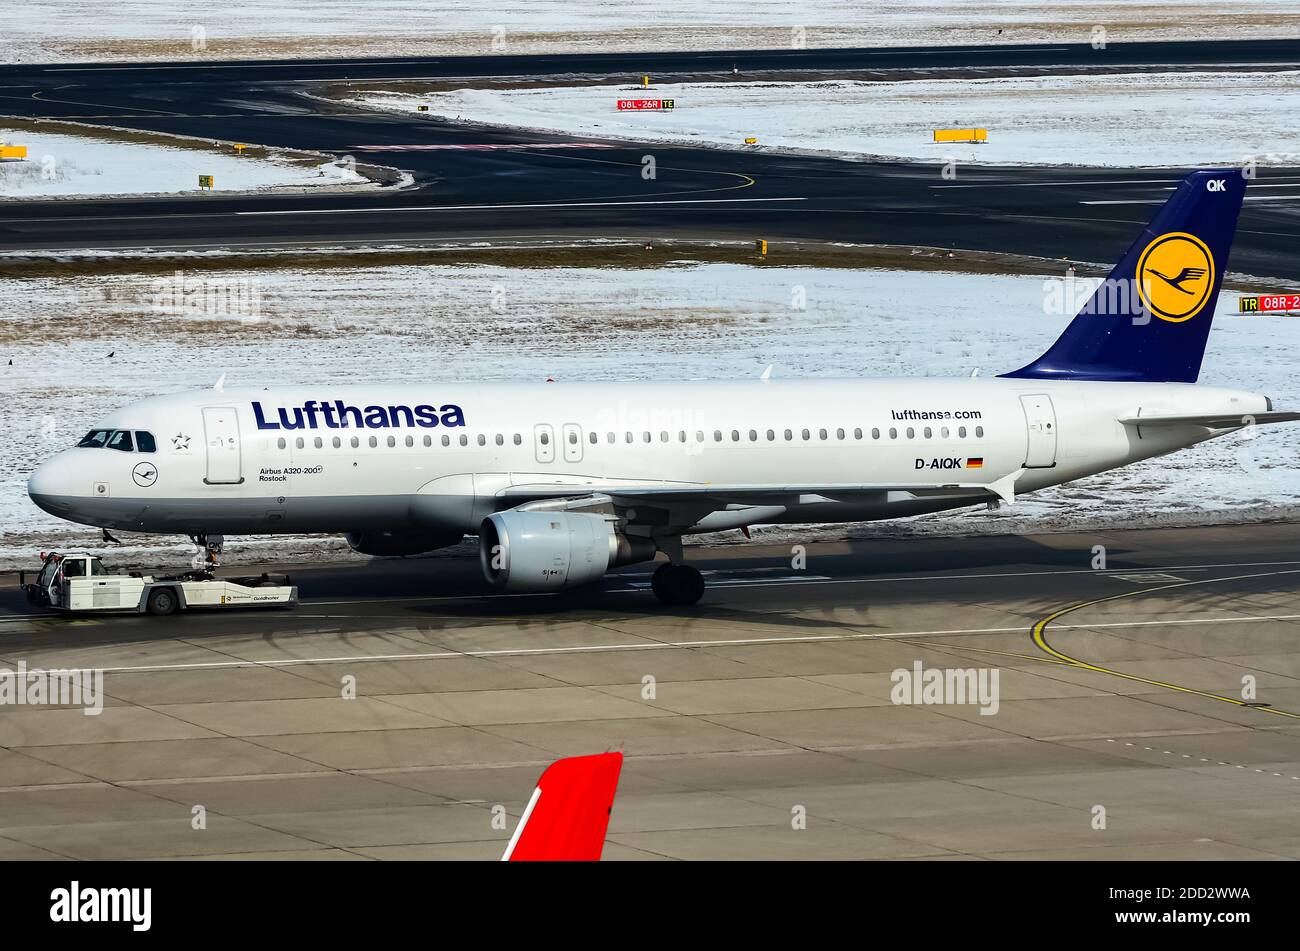 Lufthansa Airbus A320 at the Berlin Tegel airport Stock Photo